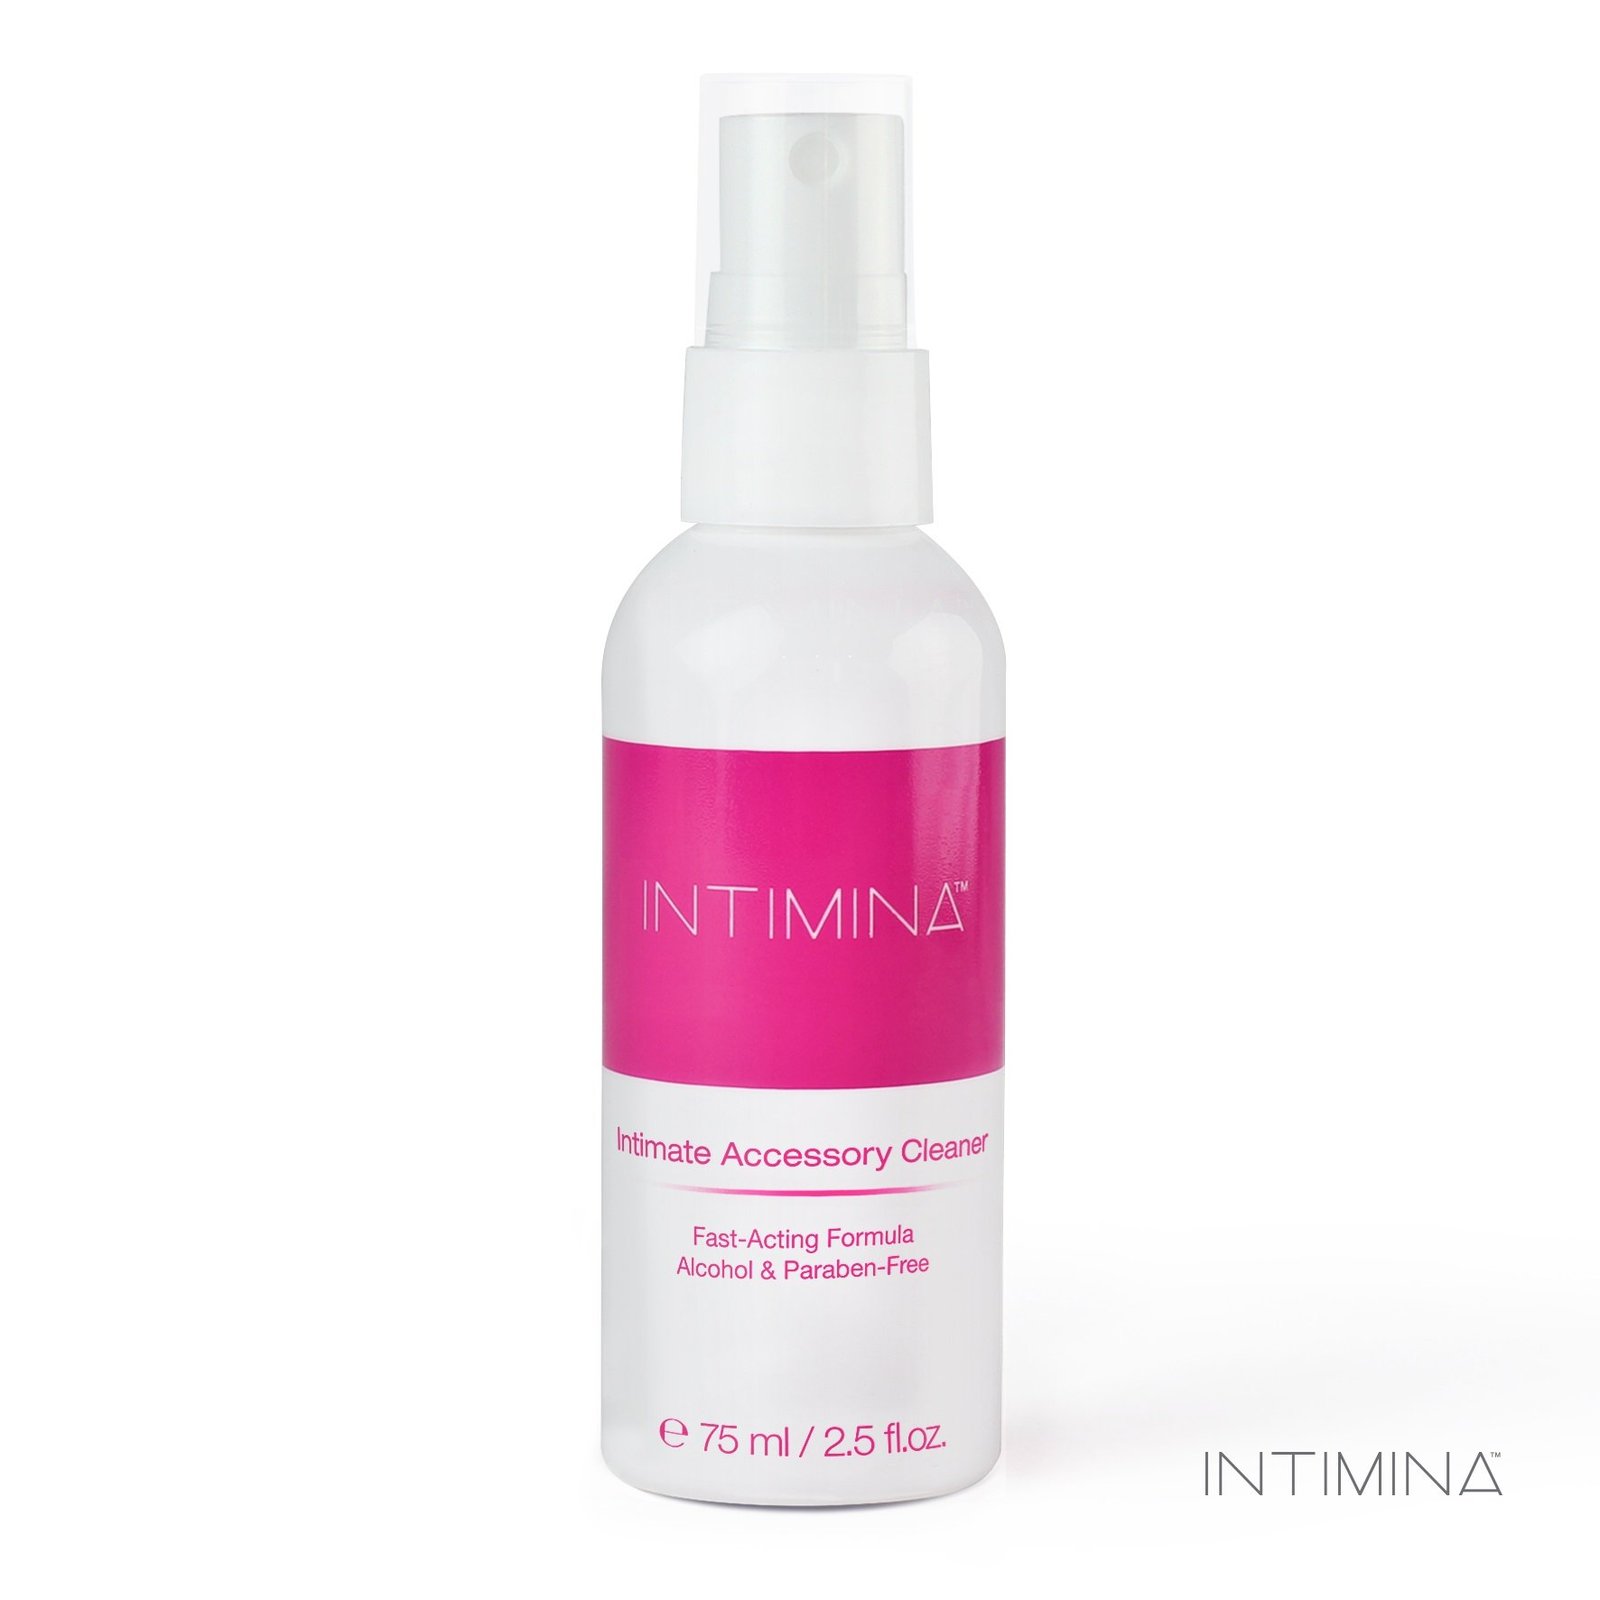 INTIMINA Intimate Accessory Cleaner 75 ml